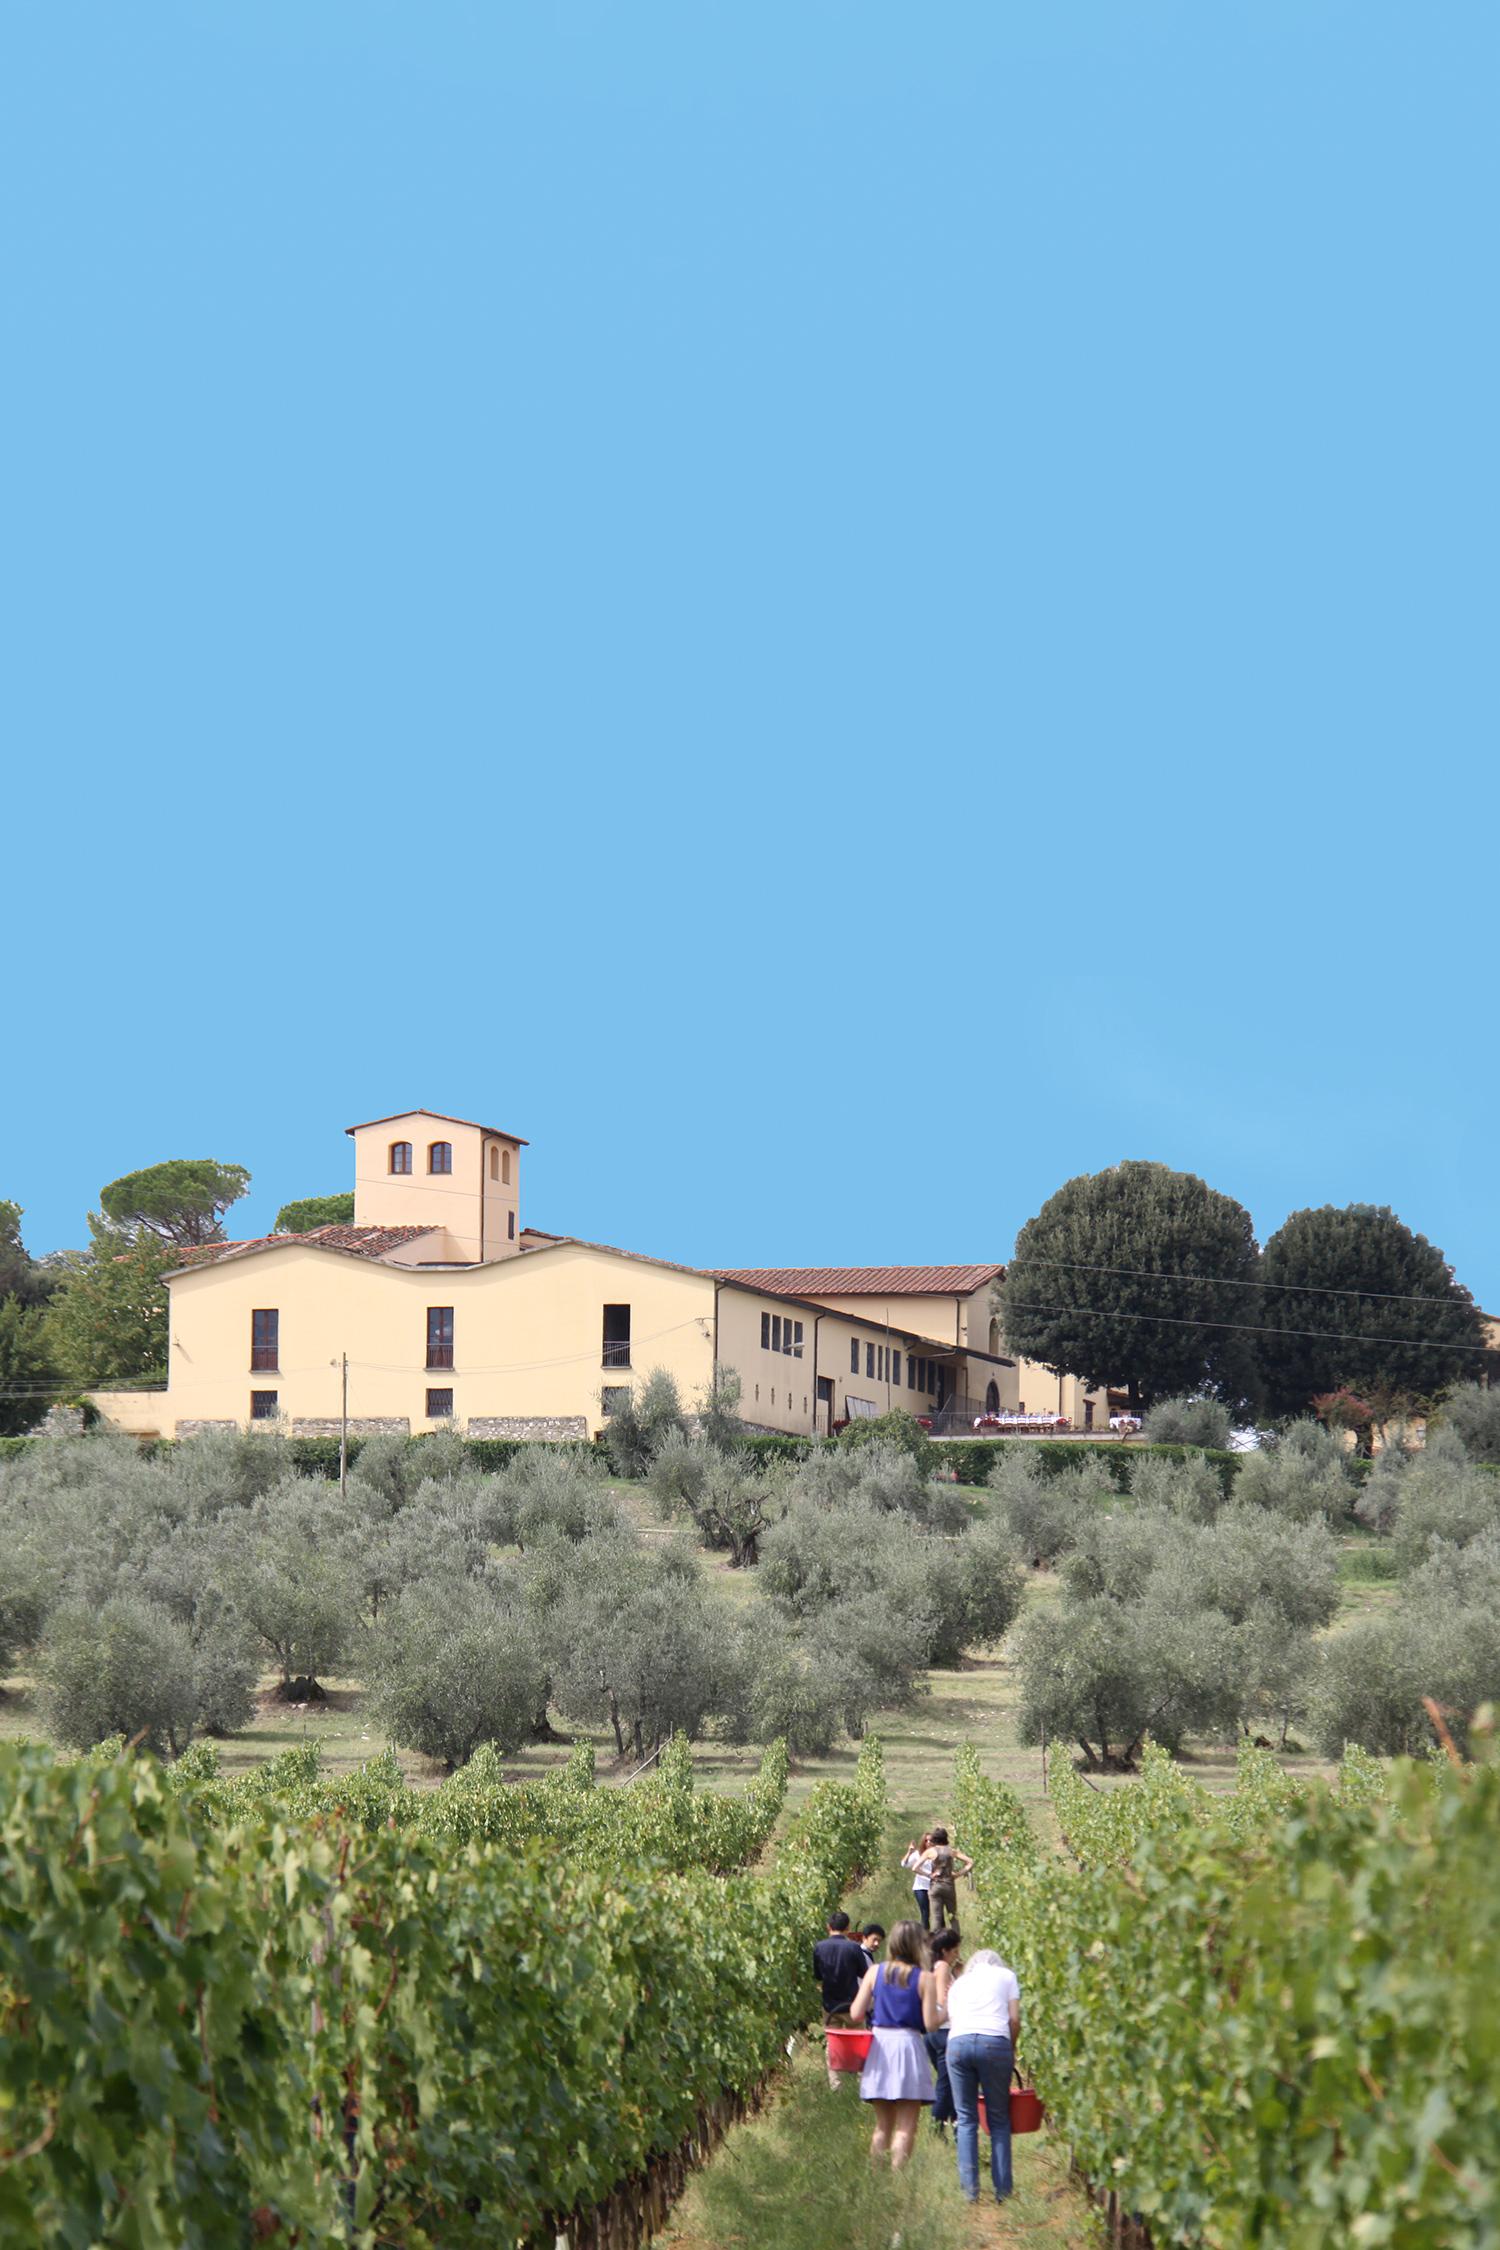 Sale of  Chianti | Fattoria Pagnana – on site sales of wine, Florence, Tuscany